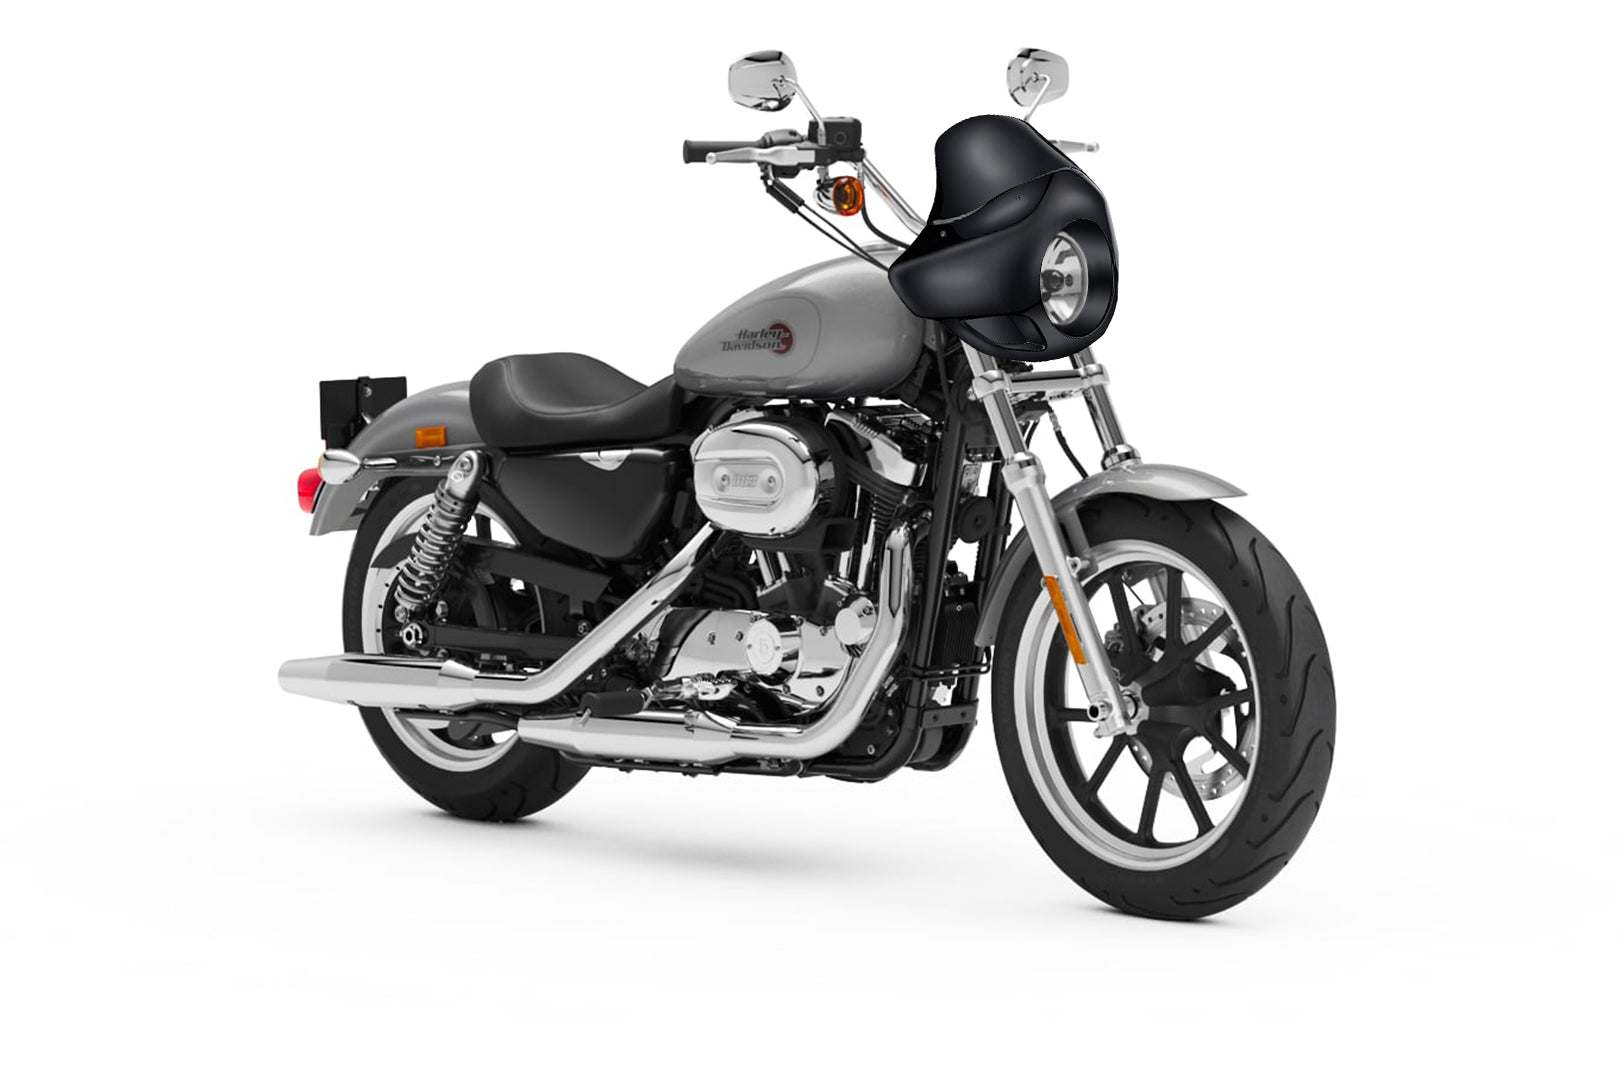 Viking Derby Motorcycle Fairing For Harley Sportster SuperLow Gloss Black Bag on Bike View @expand